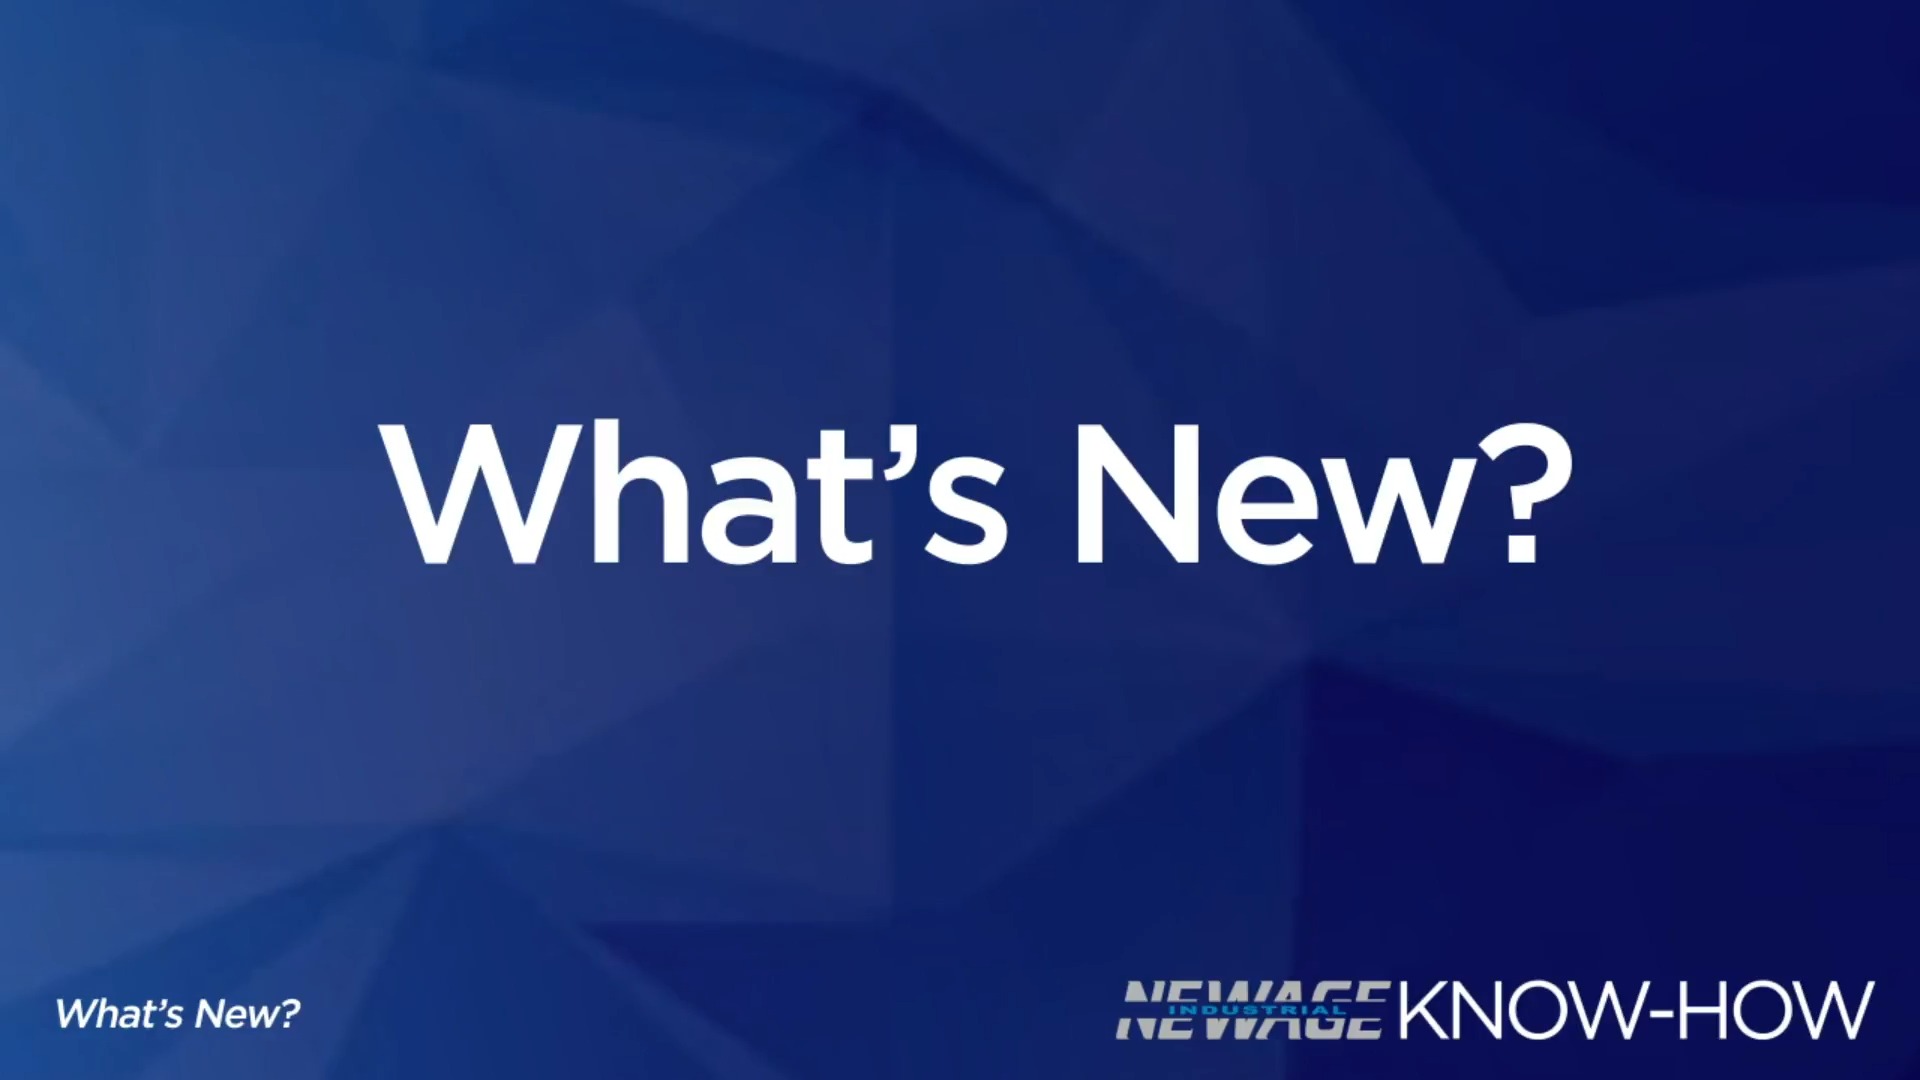 Know-How Video: What’s New?